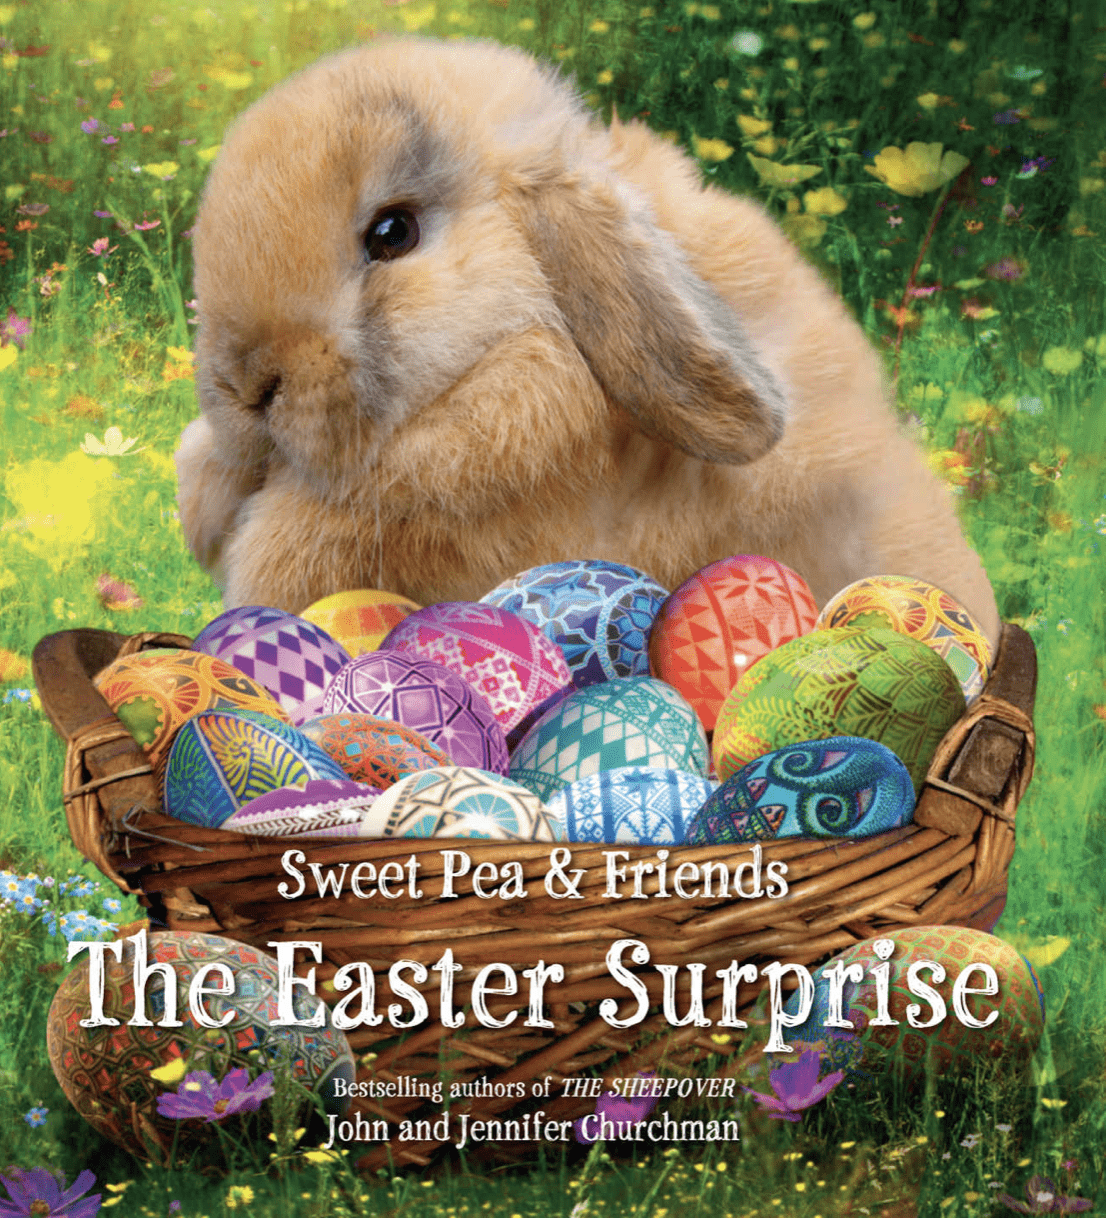 The Easter Surprise (Sweet Pea & Friends #5)